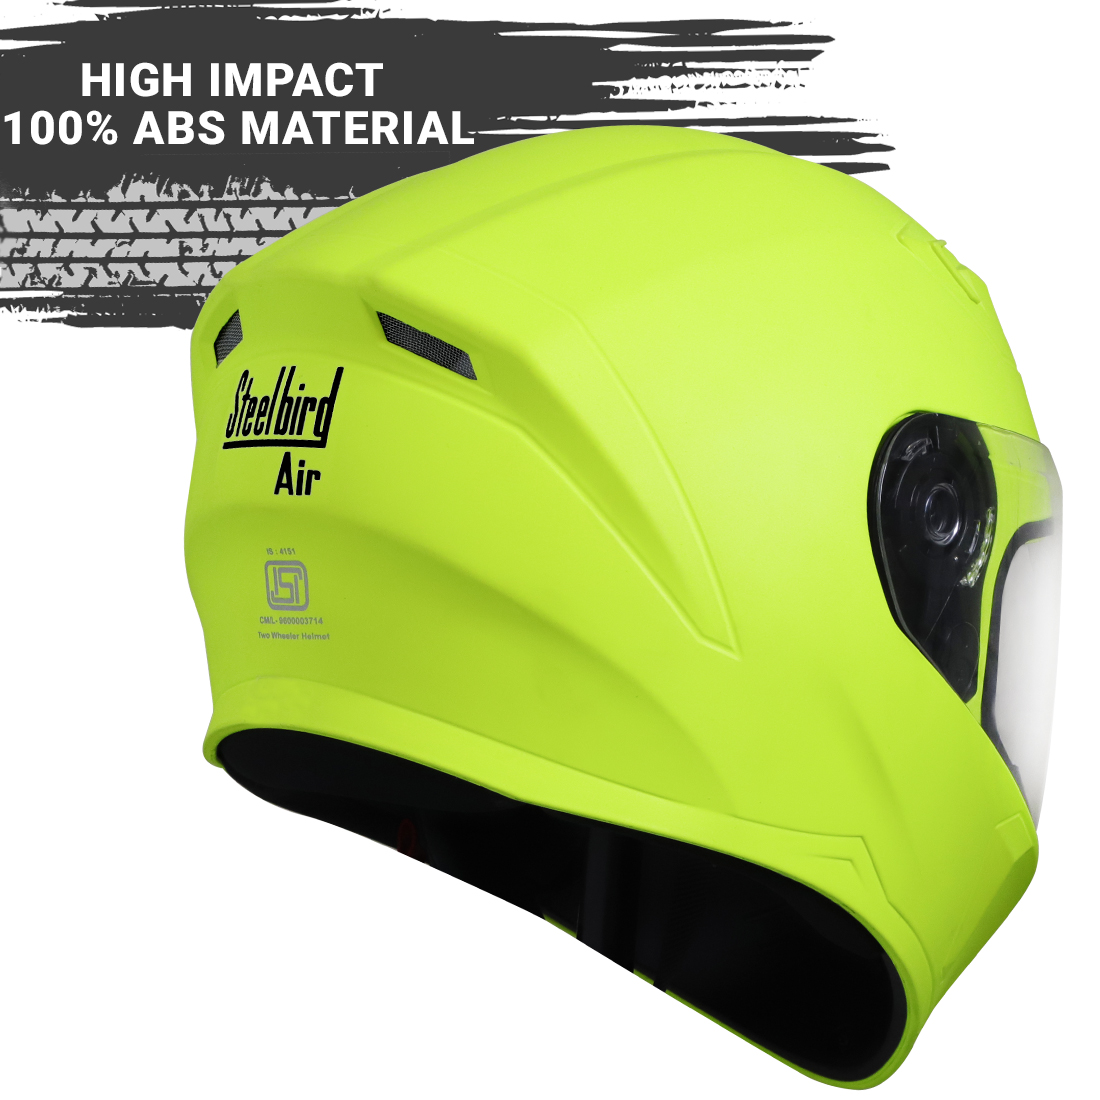 Steelbird SBA-21 GT Full Face ISI Certified Helmet With Inner Chrome Silver Sun Shield And Outer Clear Visor (Glossy Fluo Neon)